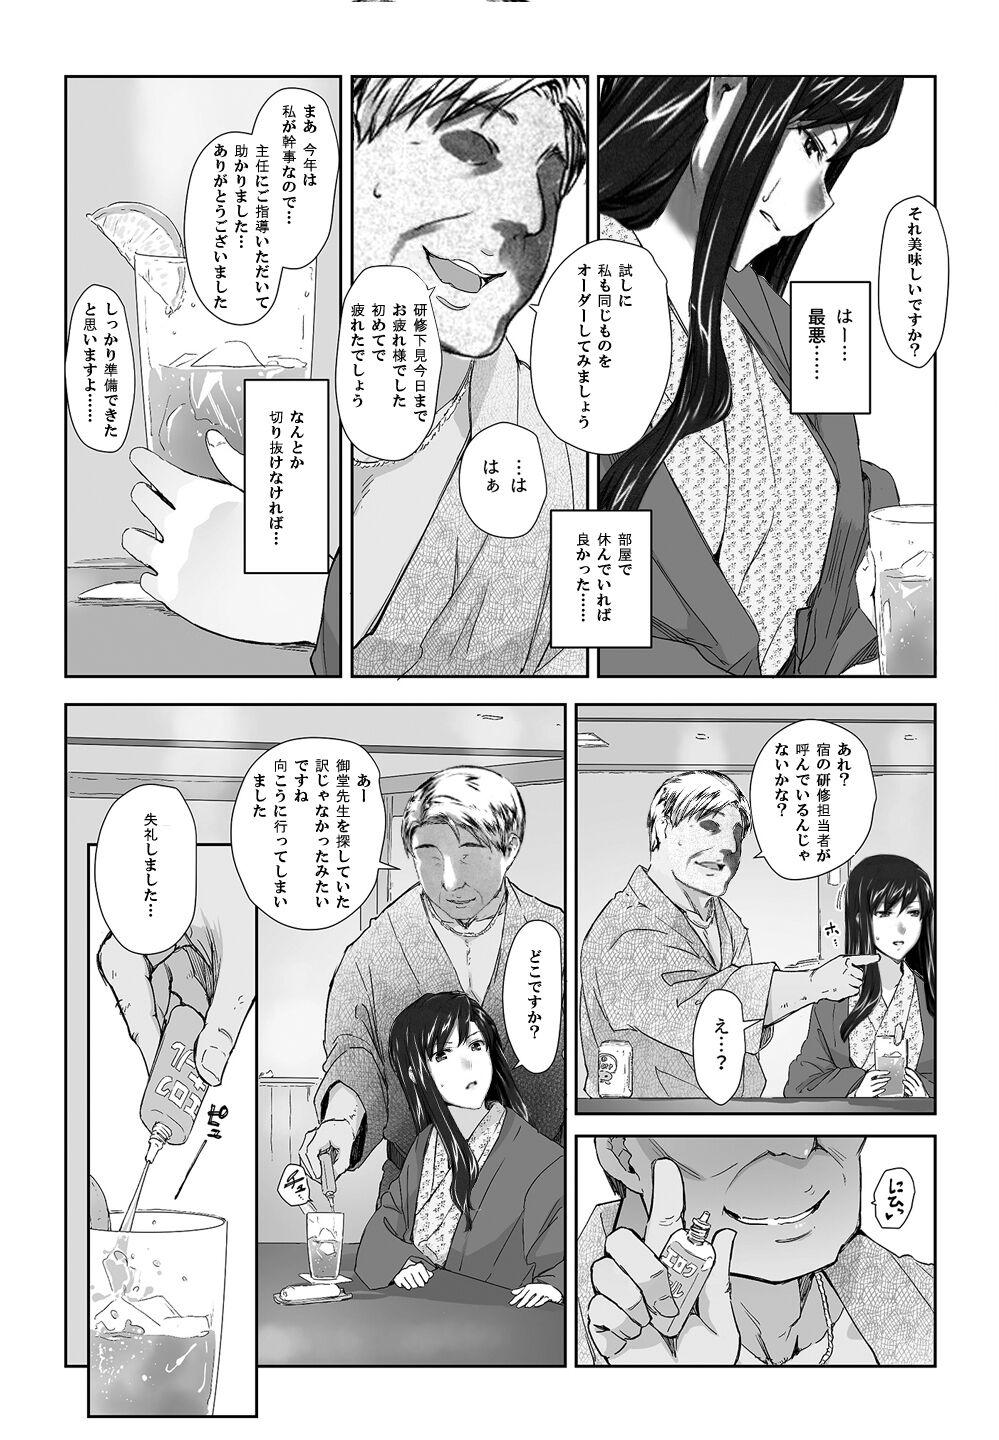 Panties Sakiko-san in delusion Vol.8 ~Sakiko-san's circumstance at an educational training Route3~ (collage) (Continue to “First day of study trip” (page 42) of Vol.1) - Original Amatuer - Page 4